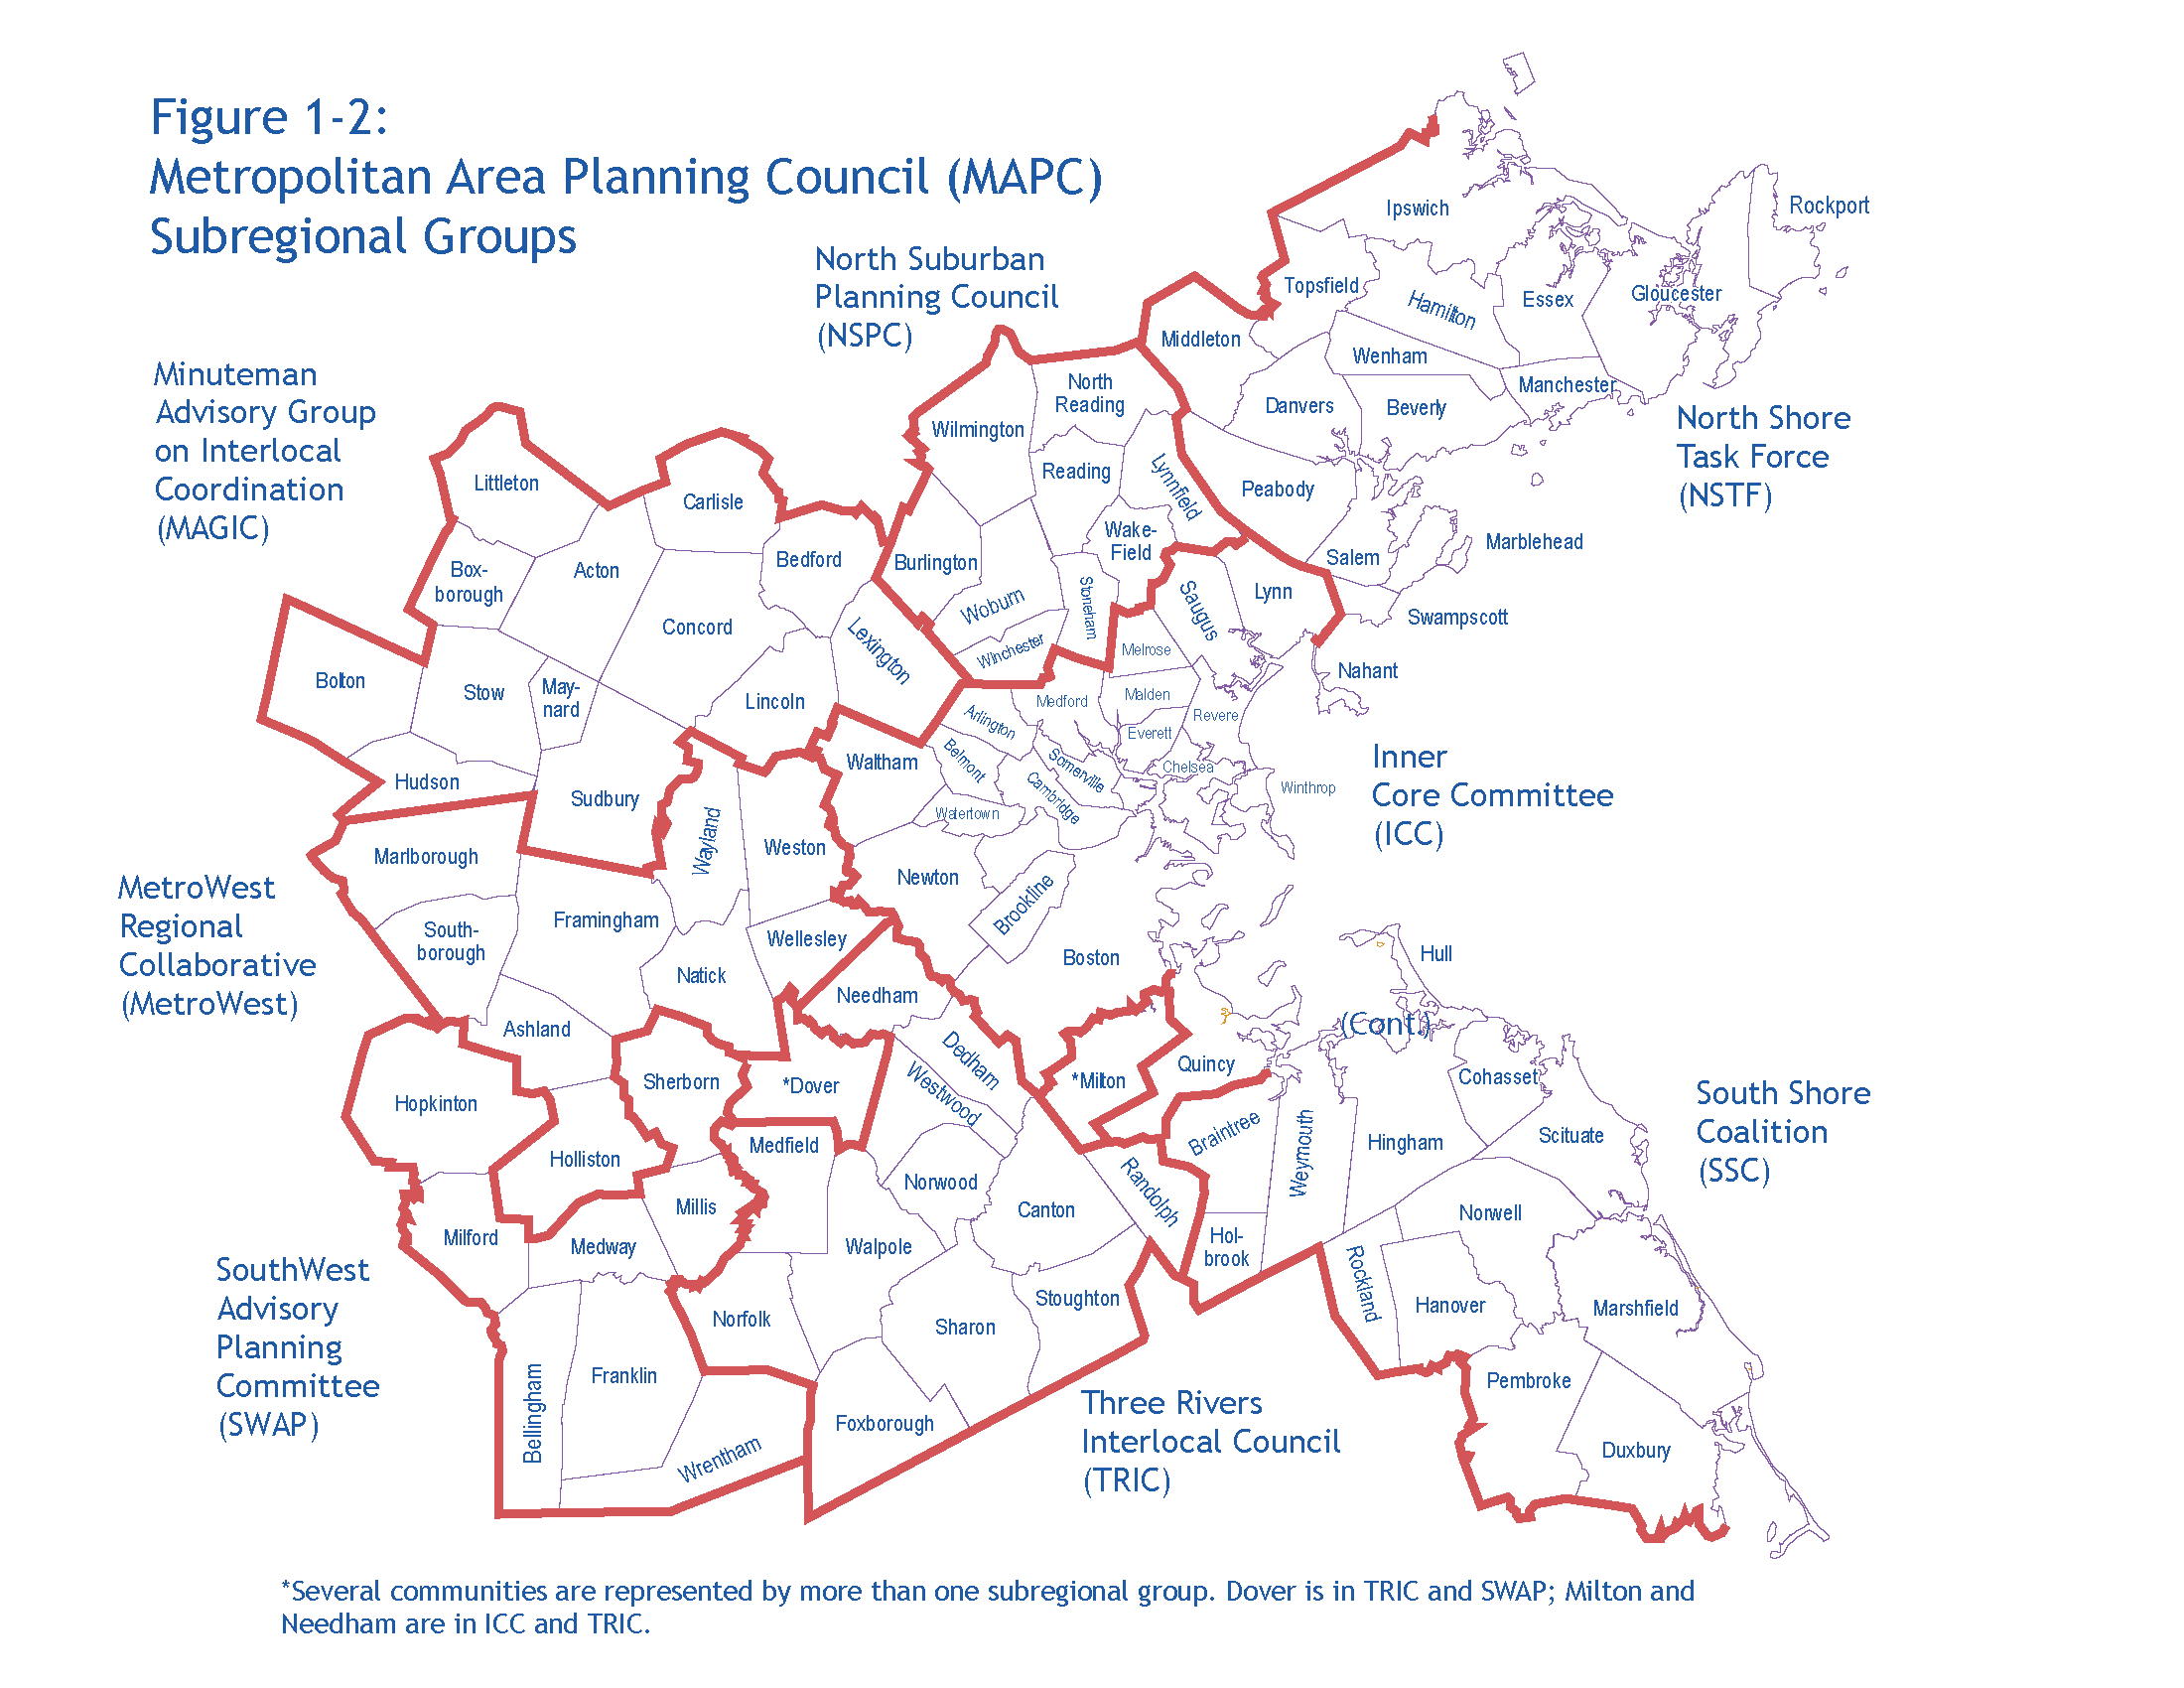 Figure 1-2: Metropolitan Area Planning Council (MAPC) Subregional GroupsThis map shows how the 101 municipalities in the Boston Region MPO region are located in eight MAPC subregions, which are represented by subregional groups. These subregional groups include the Inner Core Committee (ICC), the MetroWest Regional Collaborative (MetroWest), the Minuteman Advisory Group on Interlocal Coordination (MAGIC), the North Suburban Planning Council (NSPC), the North Shore Task Force (NSTF), the South Shore Coalition (SSC), the SouthWest Advisory Planning Committee (SWAP), and the Three Rivers Interlocal Council (TRIC). Two communities are represented by more than one subregional group; Dover is in TRIC and SWAP, and Milton and Needham are in ICC and TRIC.